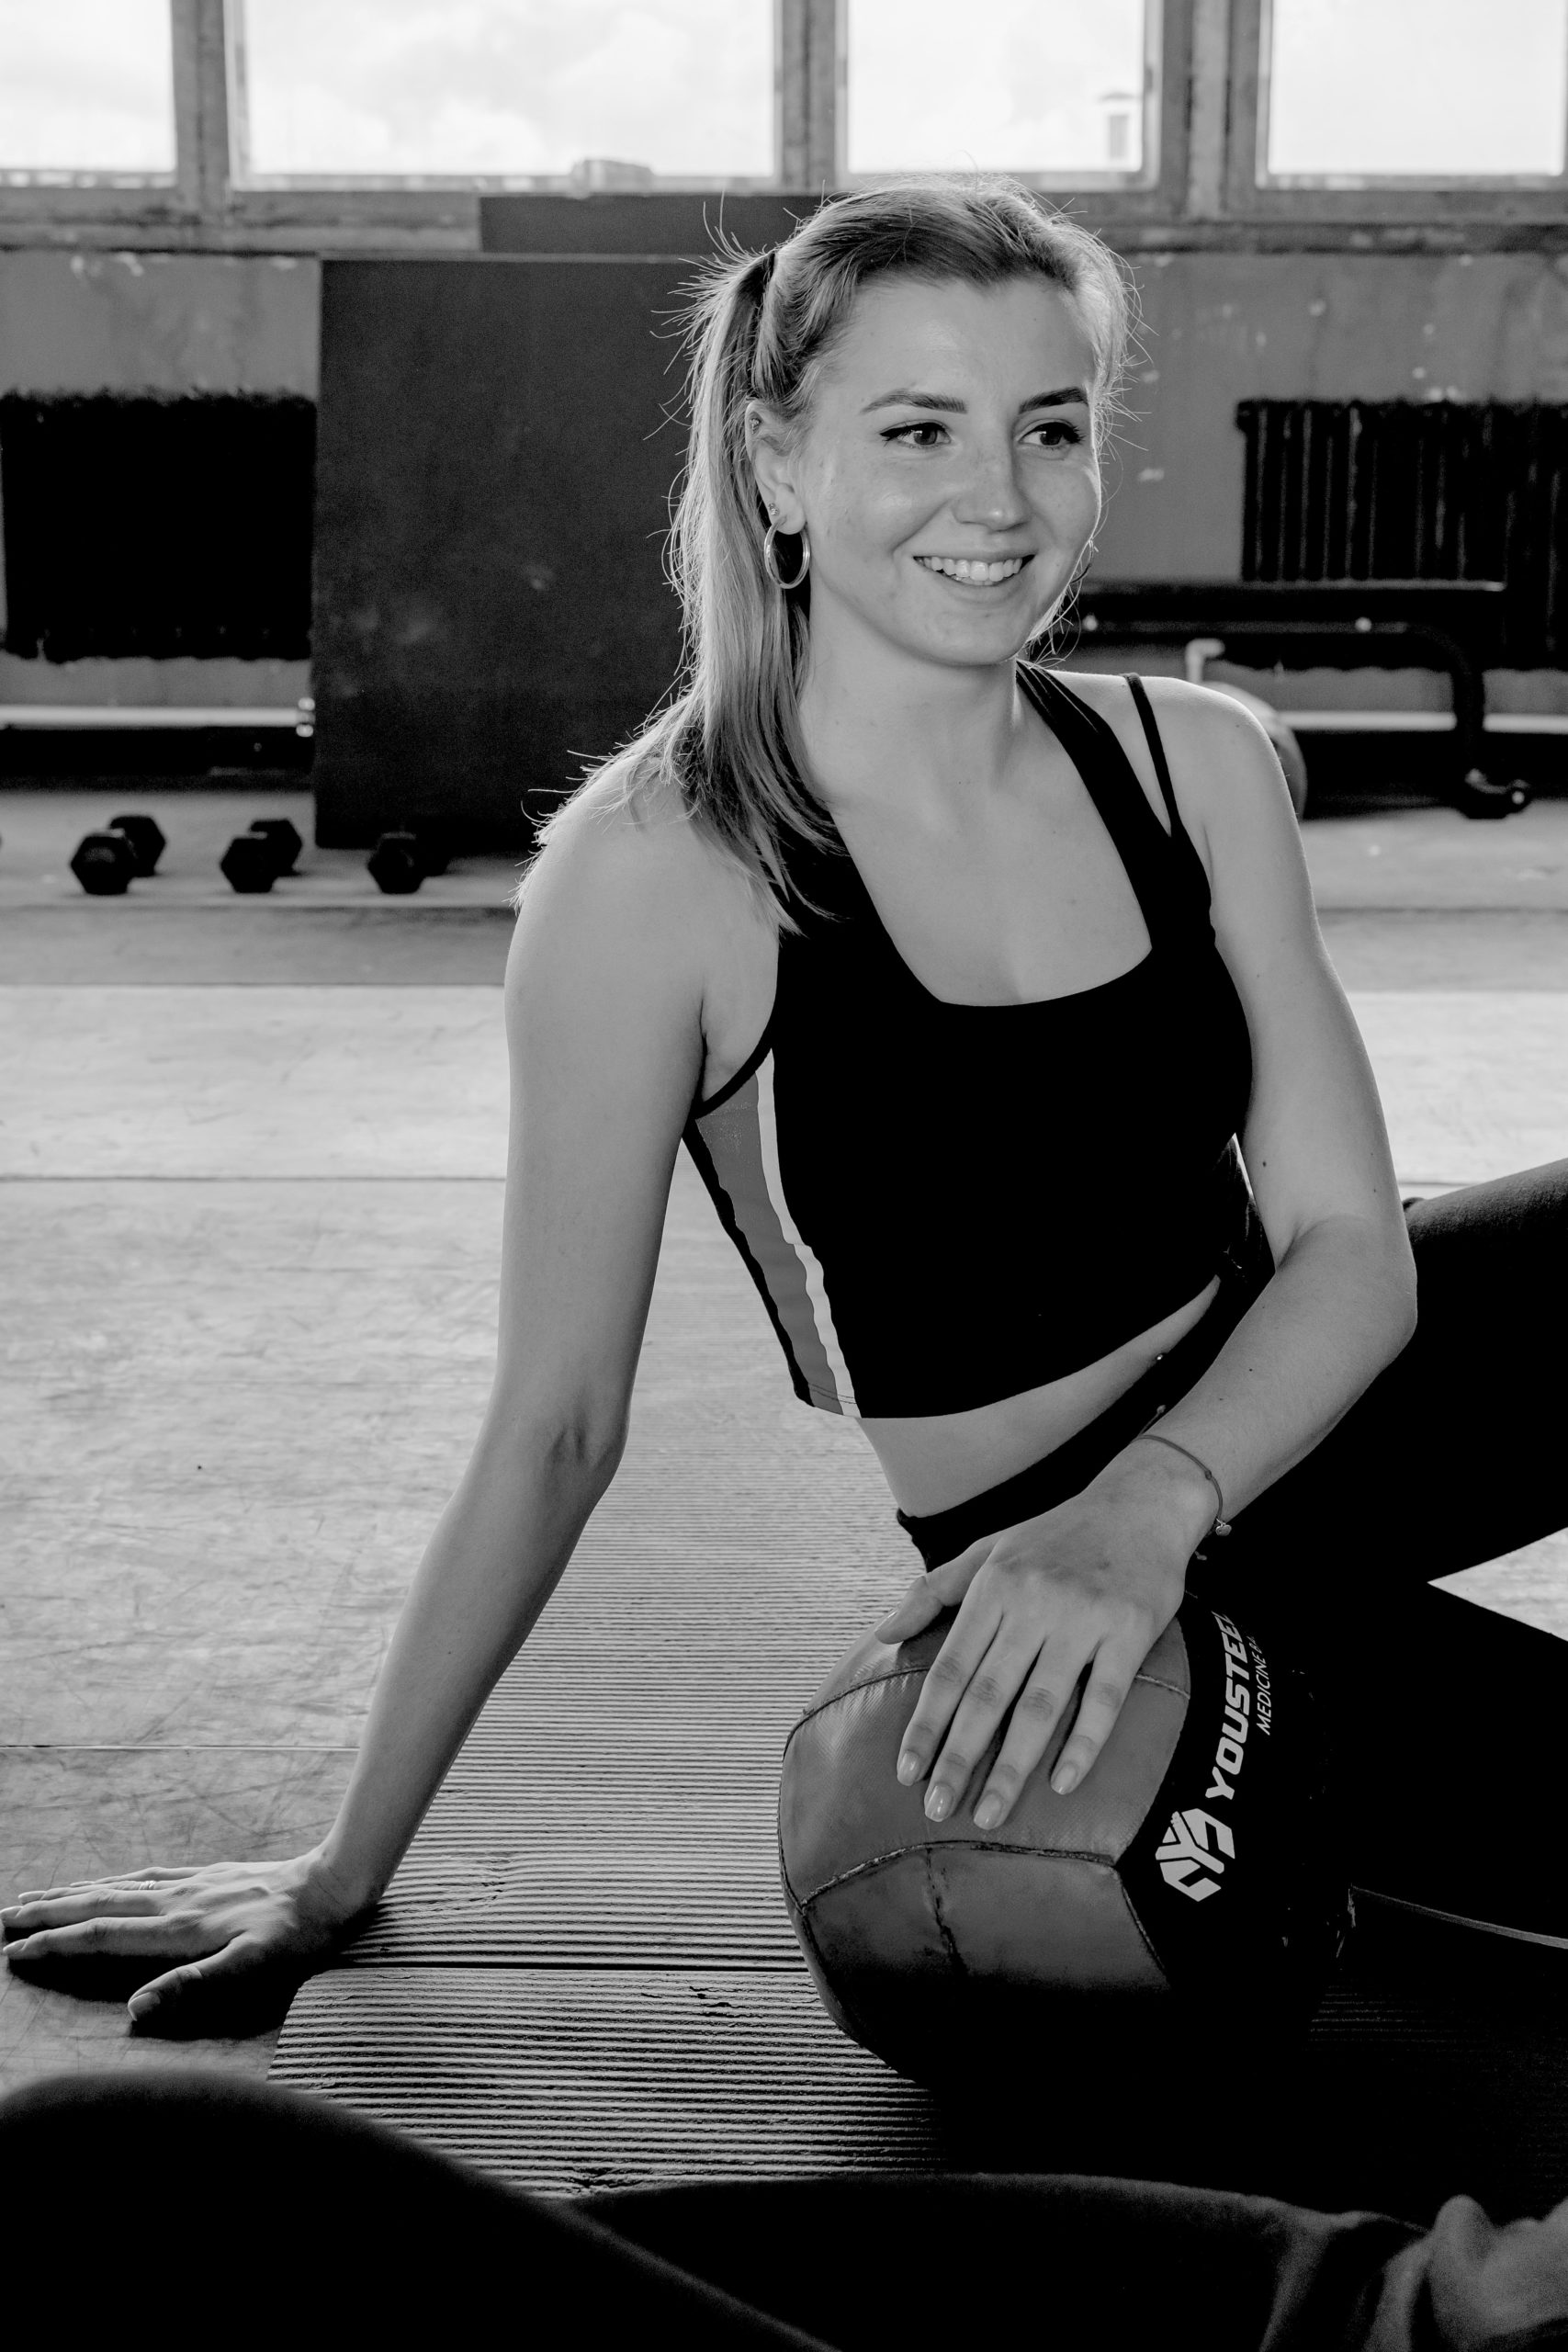 woman sitting in gym to make wall balls easier holding medicine ball and smiling with her hair in a ponytail and gym equipment around her